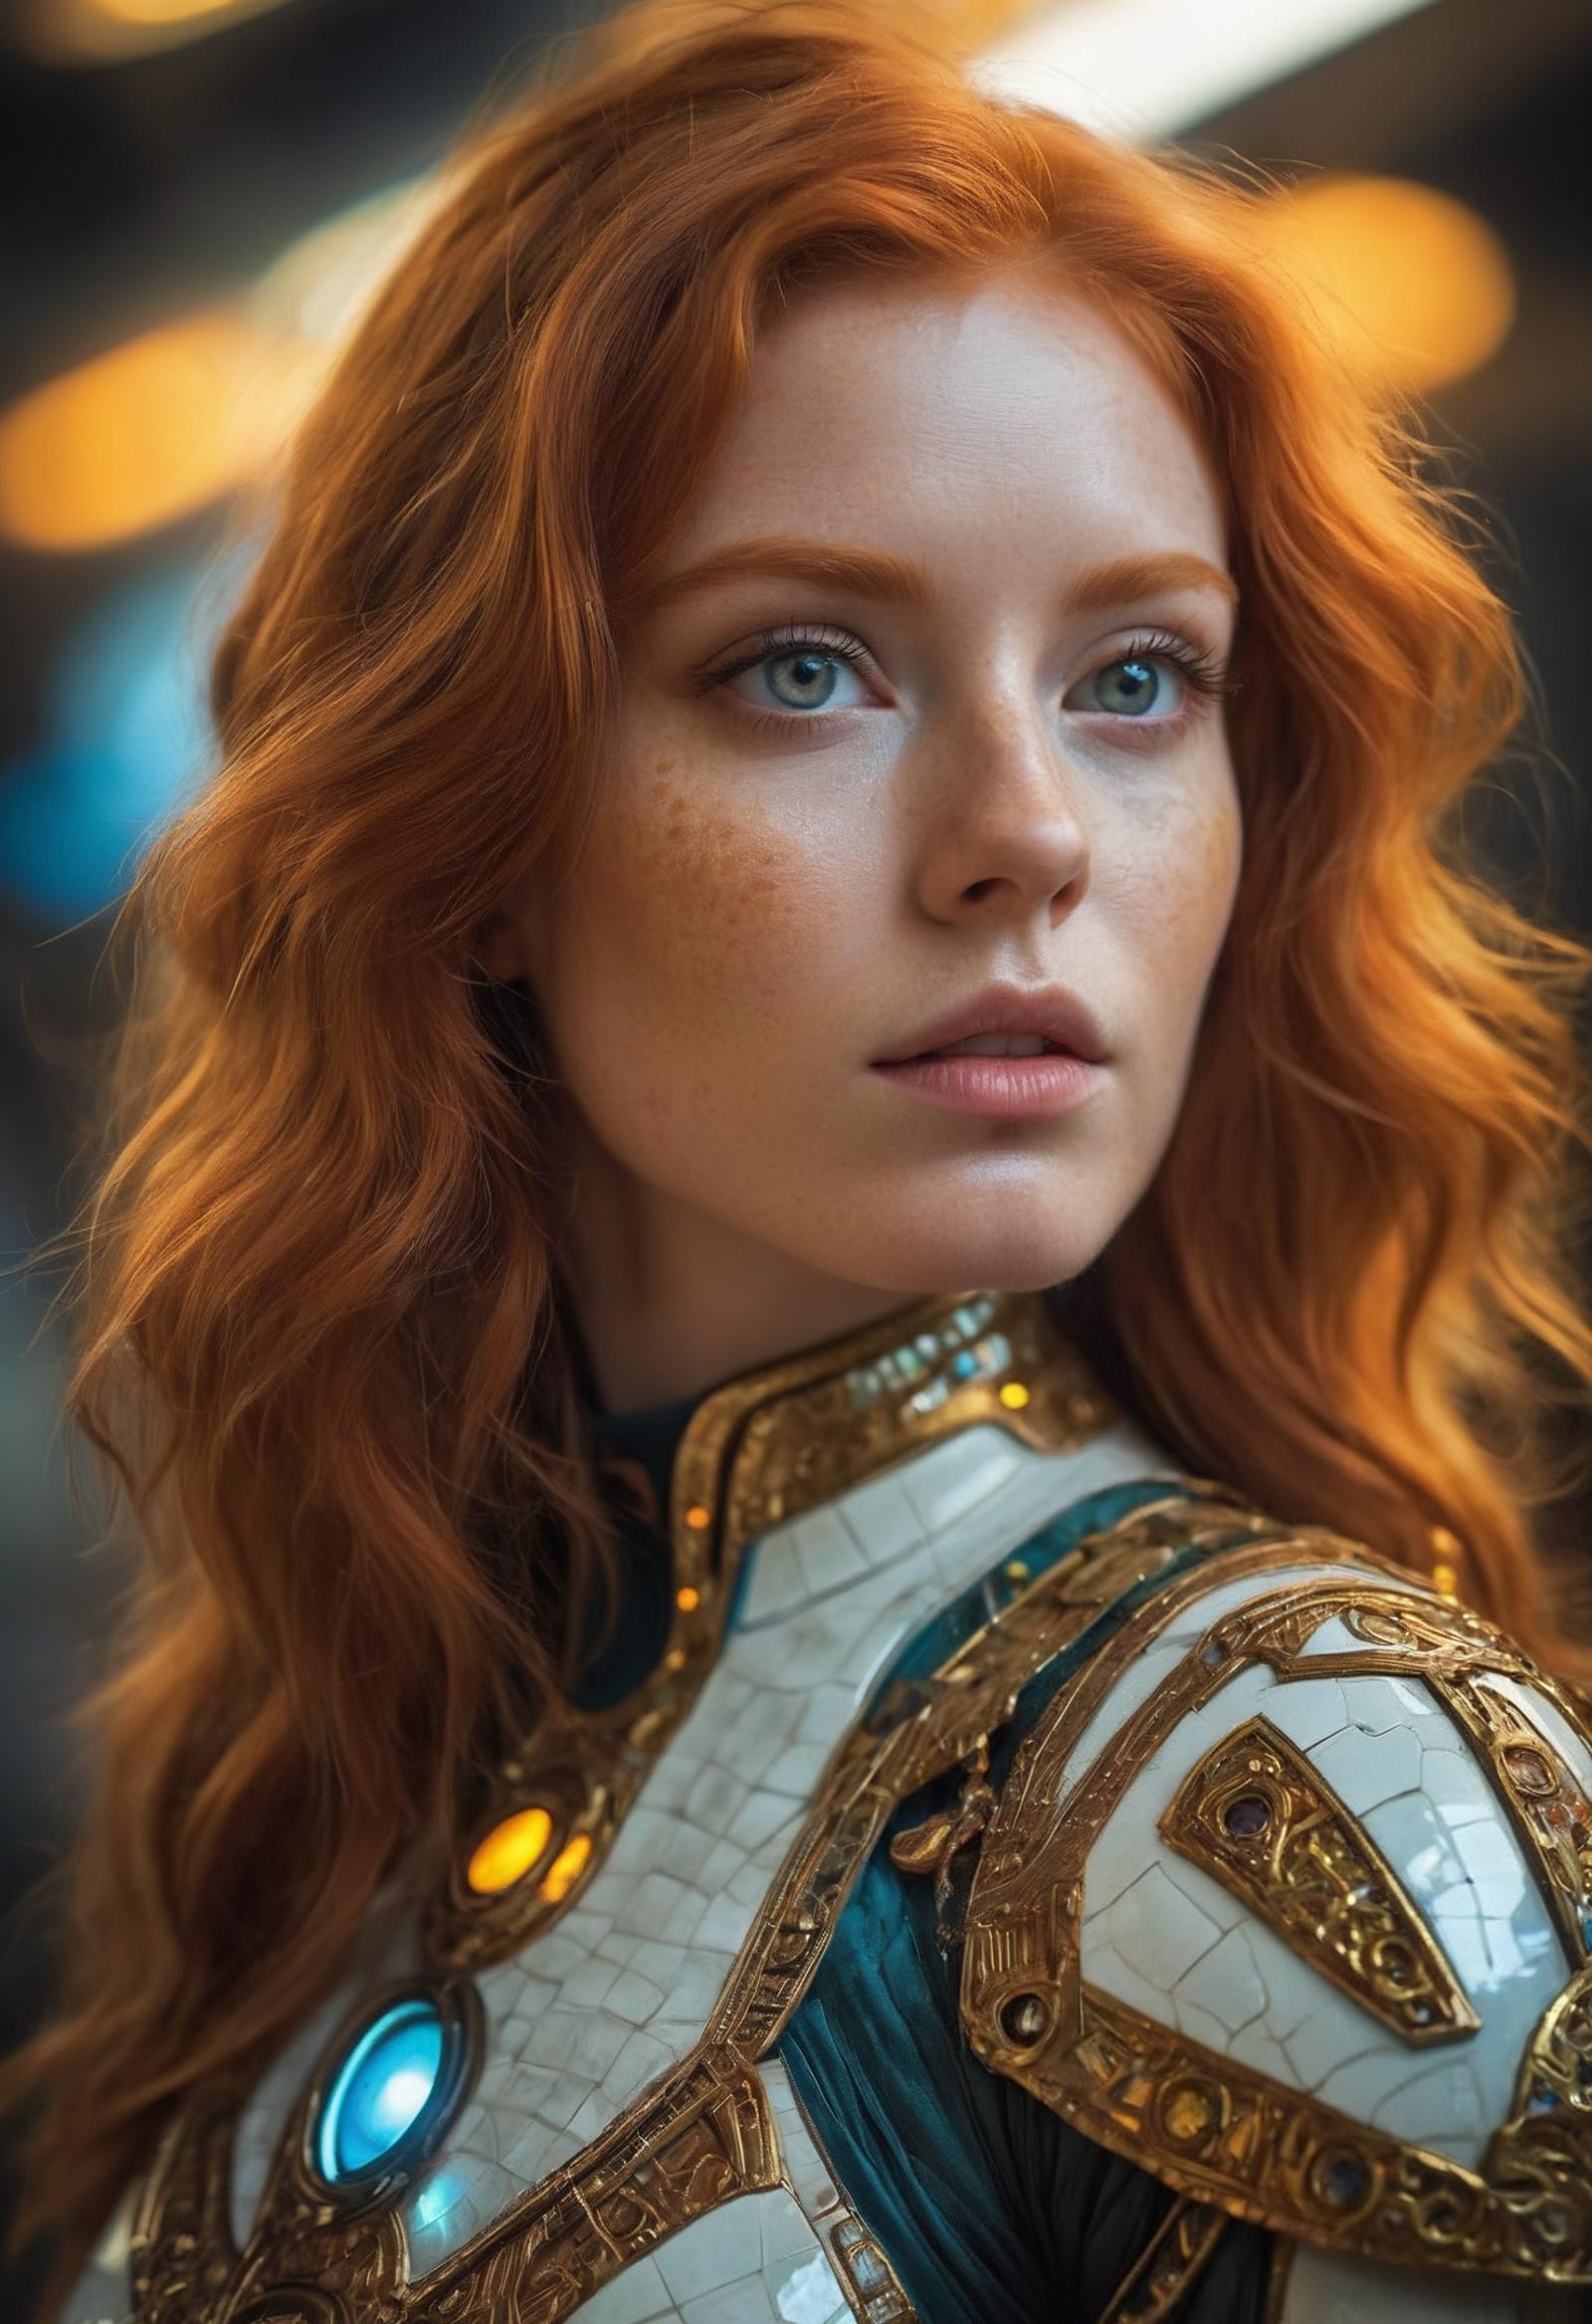 A gorgeous young woman with red hair, wearing a white and gold outfit, looking straight ahead.